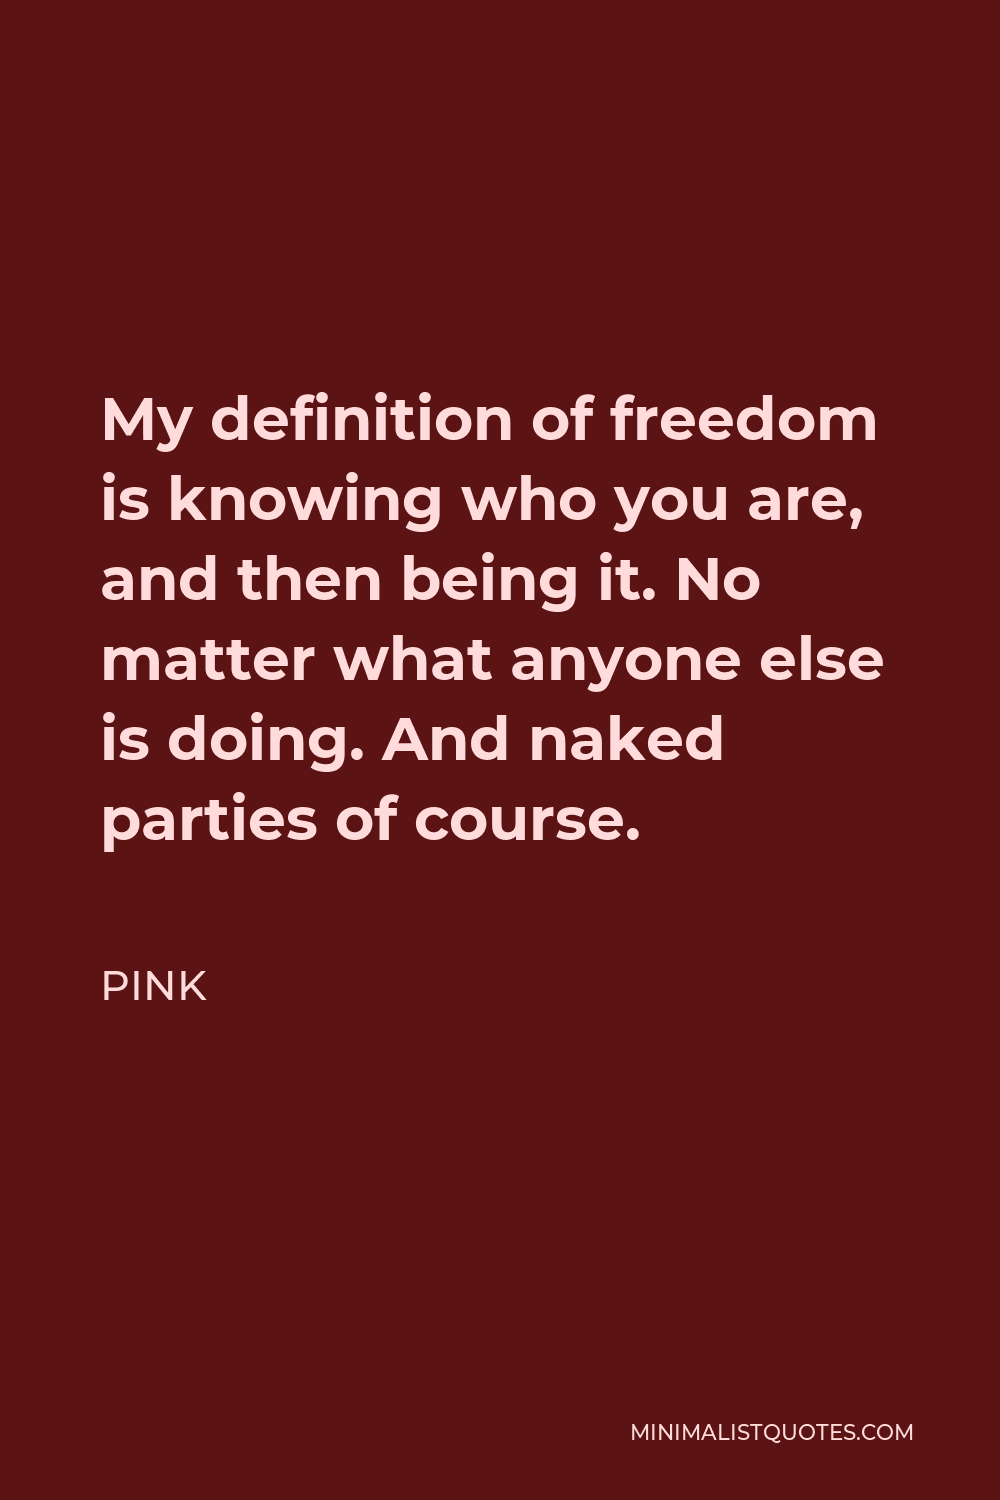 Pink Quote - My definition of freedom is knowing who you are, and then being it. No matter what anyone else is doing. And naked parties of course.